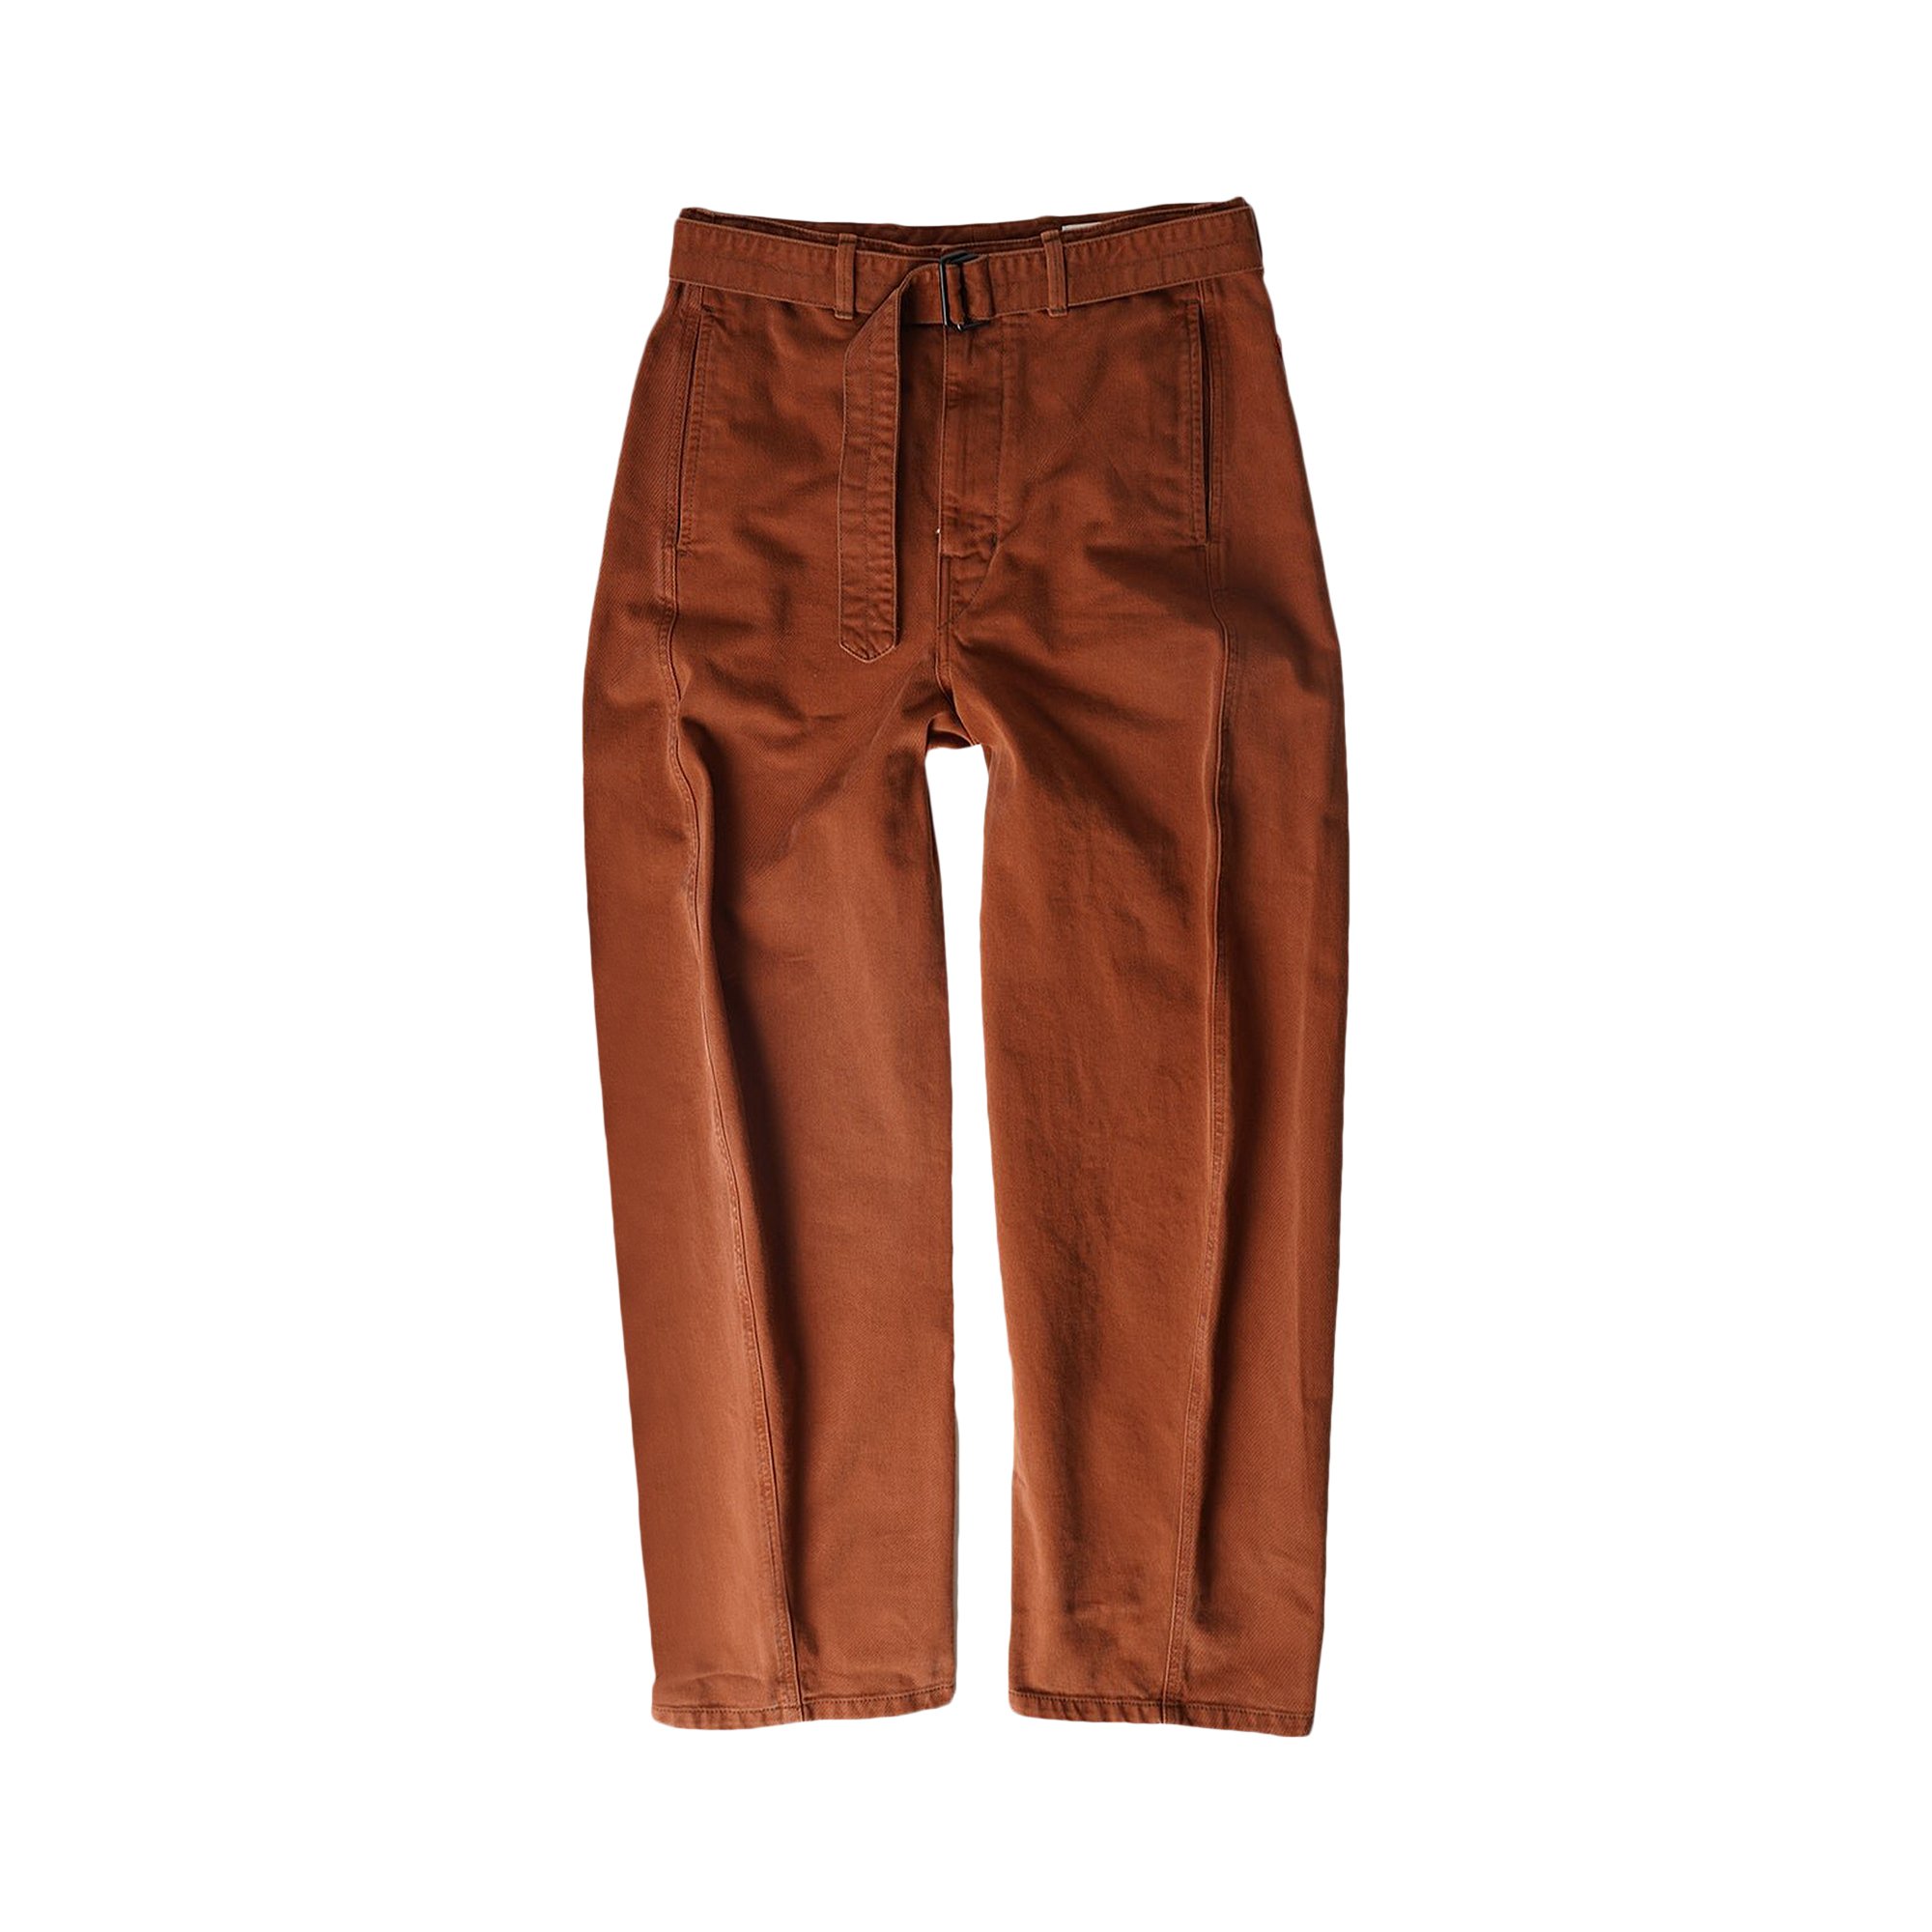 Twisted belted cotton pants in green - Lemaire